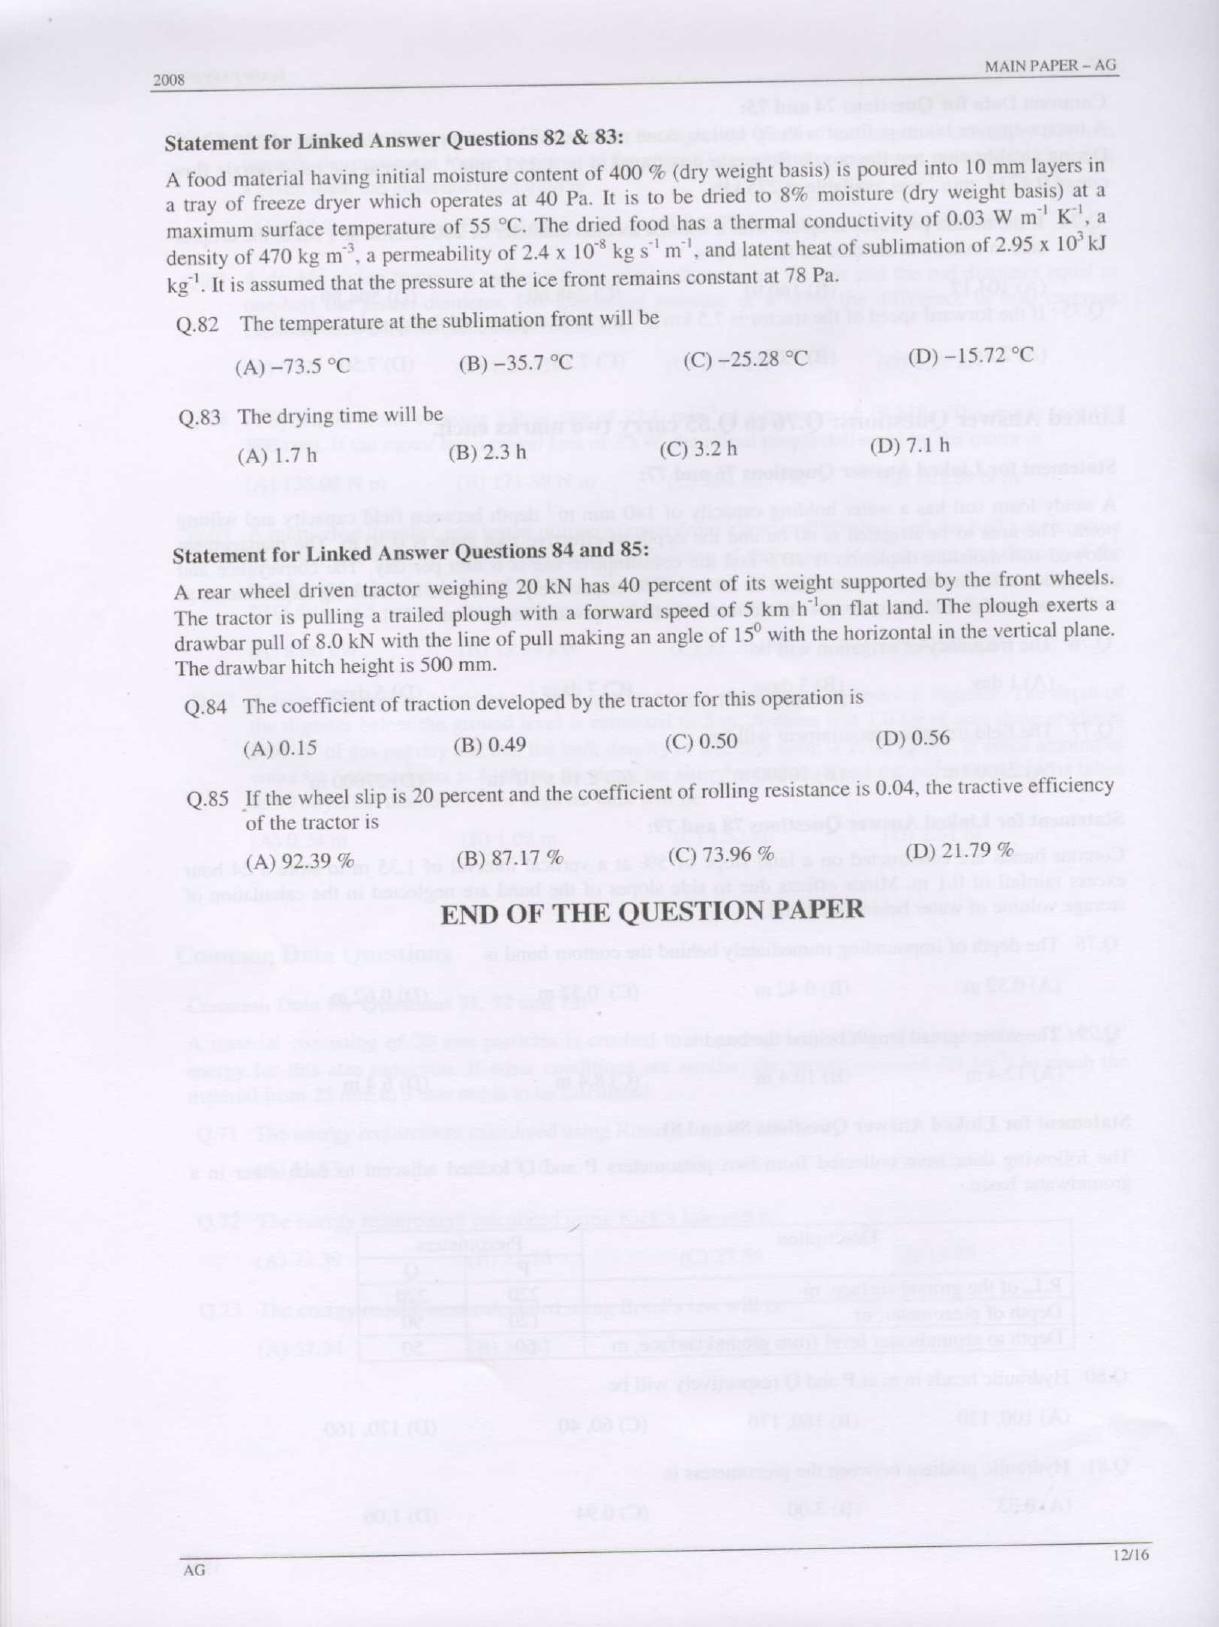 GATE 2008 Agricultural Engineering (AG) Question Paper with Answer Key - Page 12